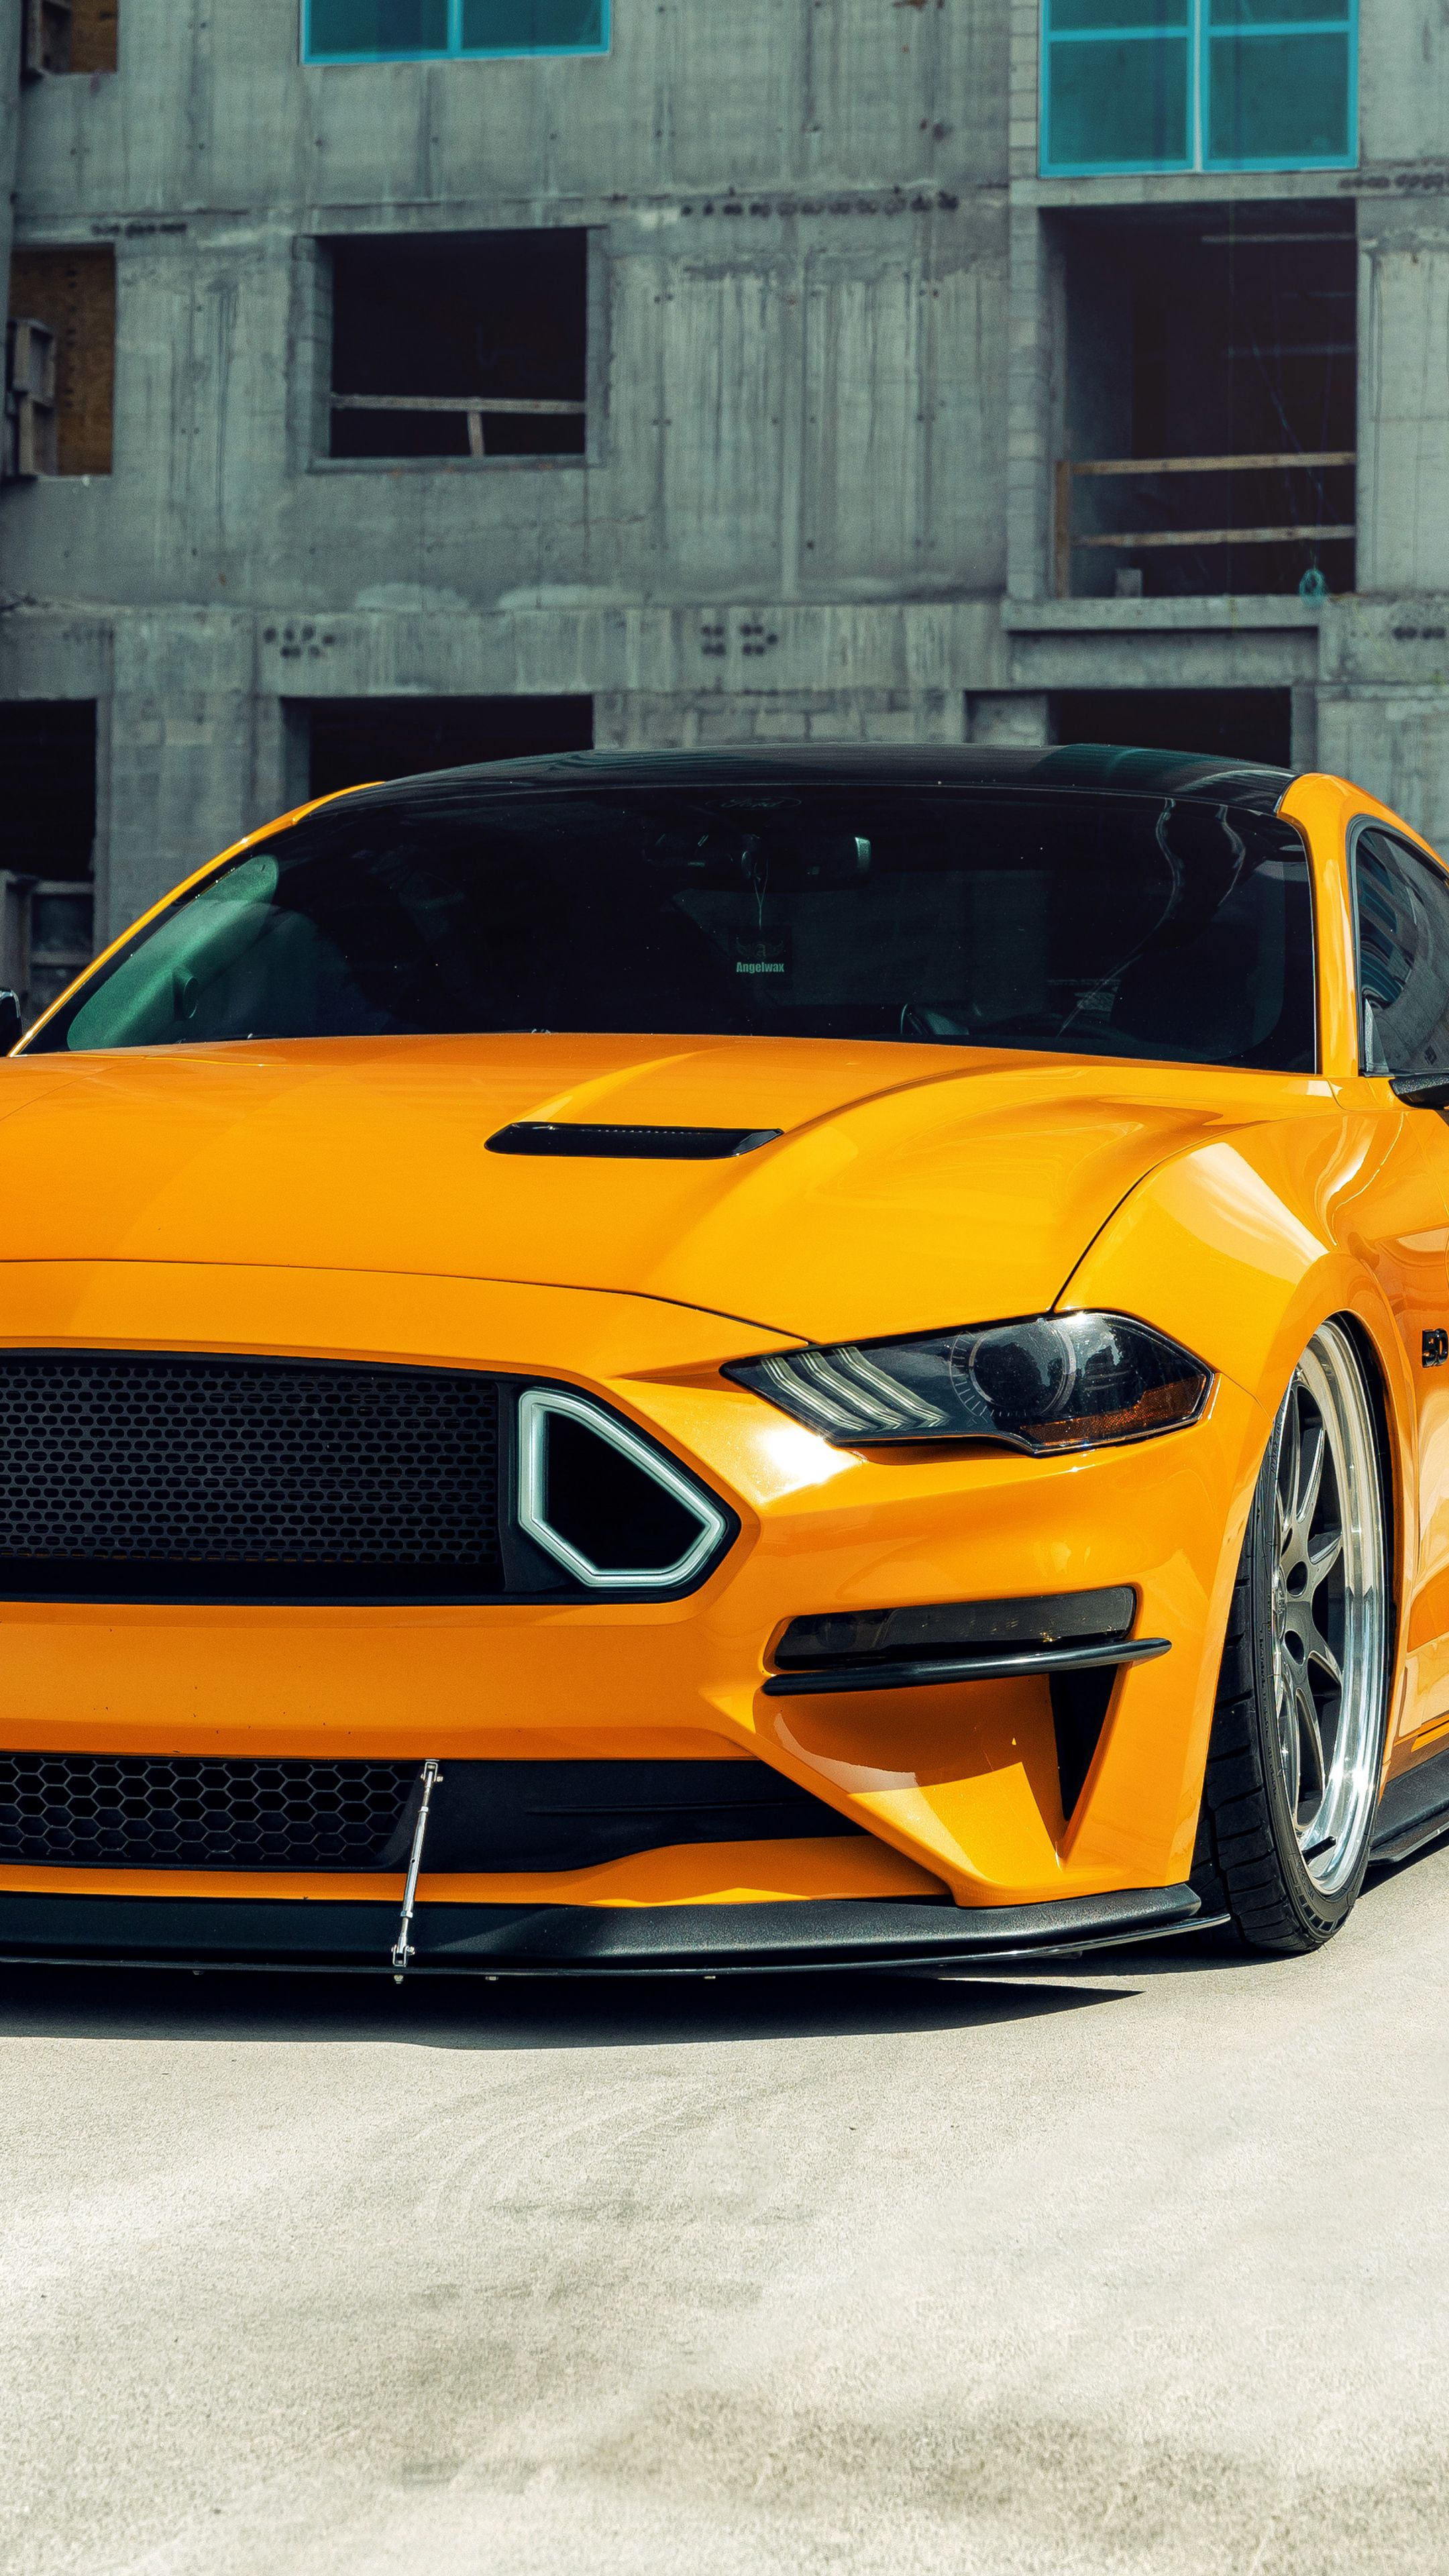 2160x3840 Yellow Ford Mustang GT, 2020 wallpaper | Ford mustang gt, Mustang gt, Ford mustang